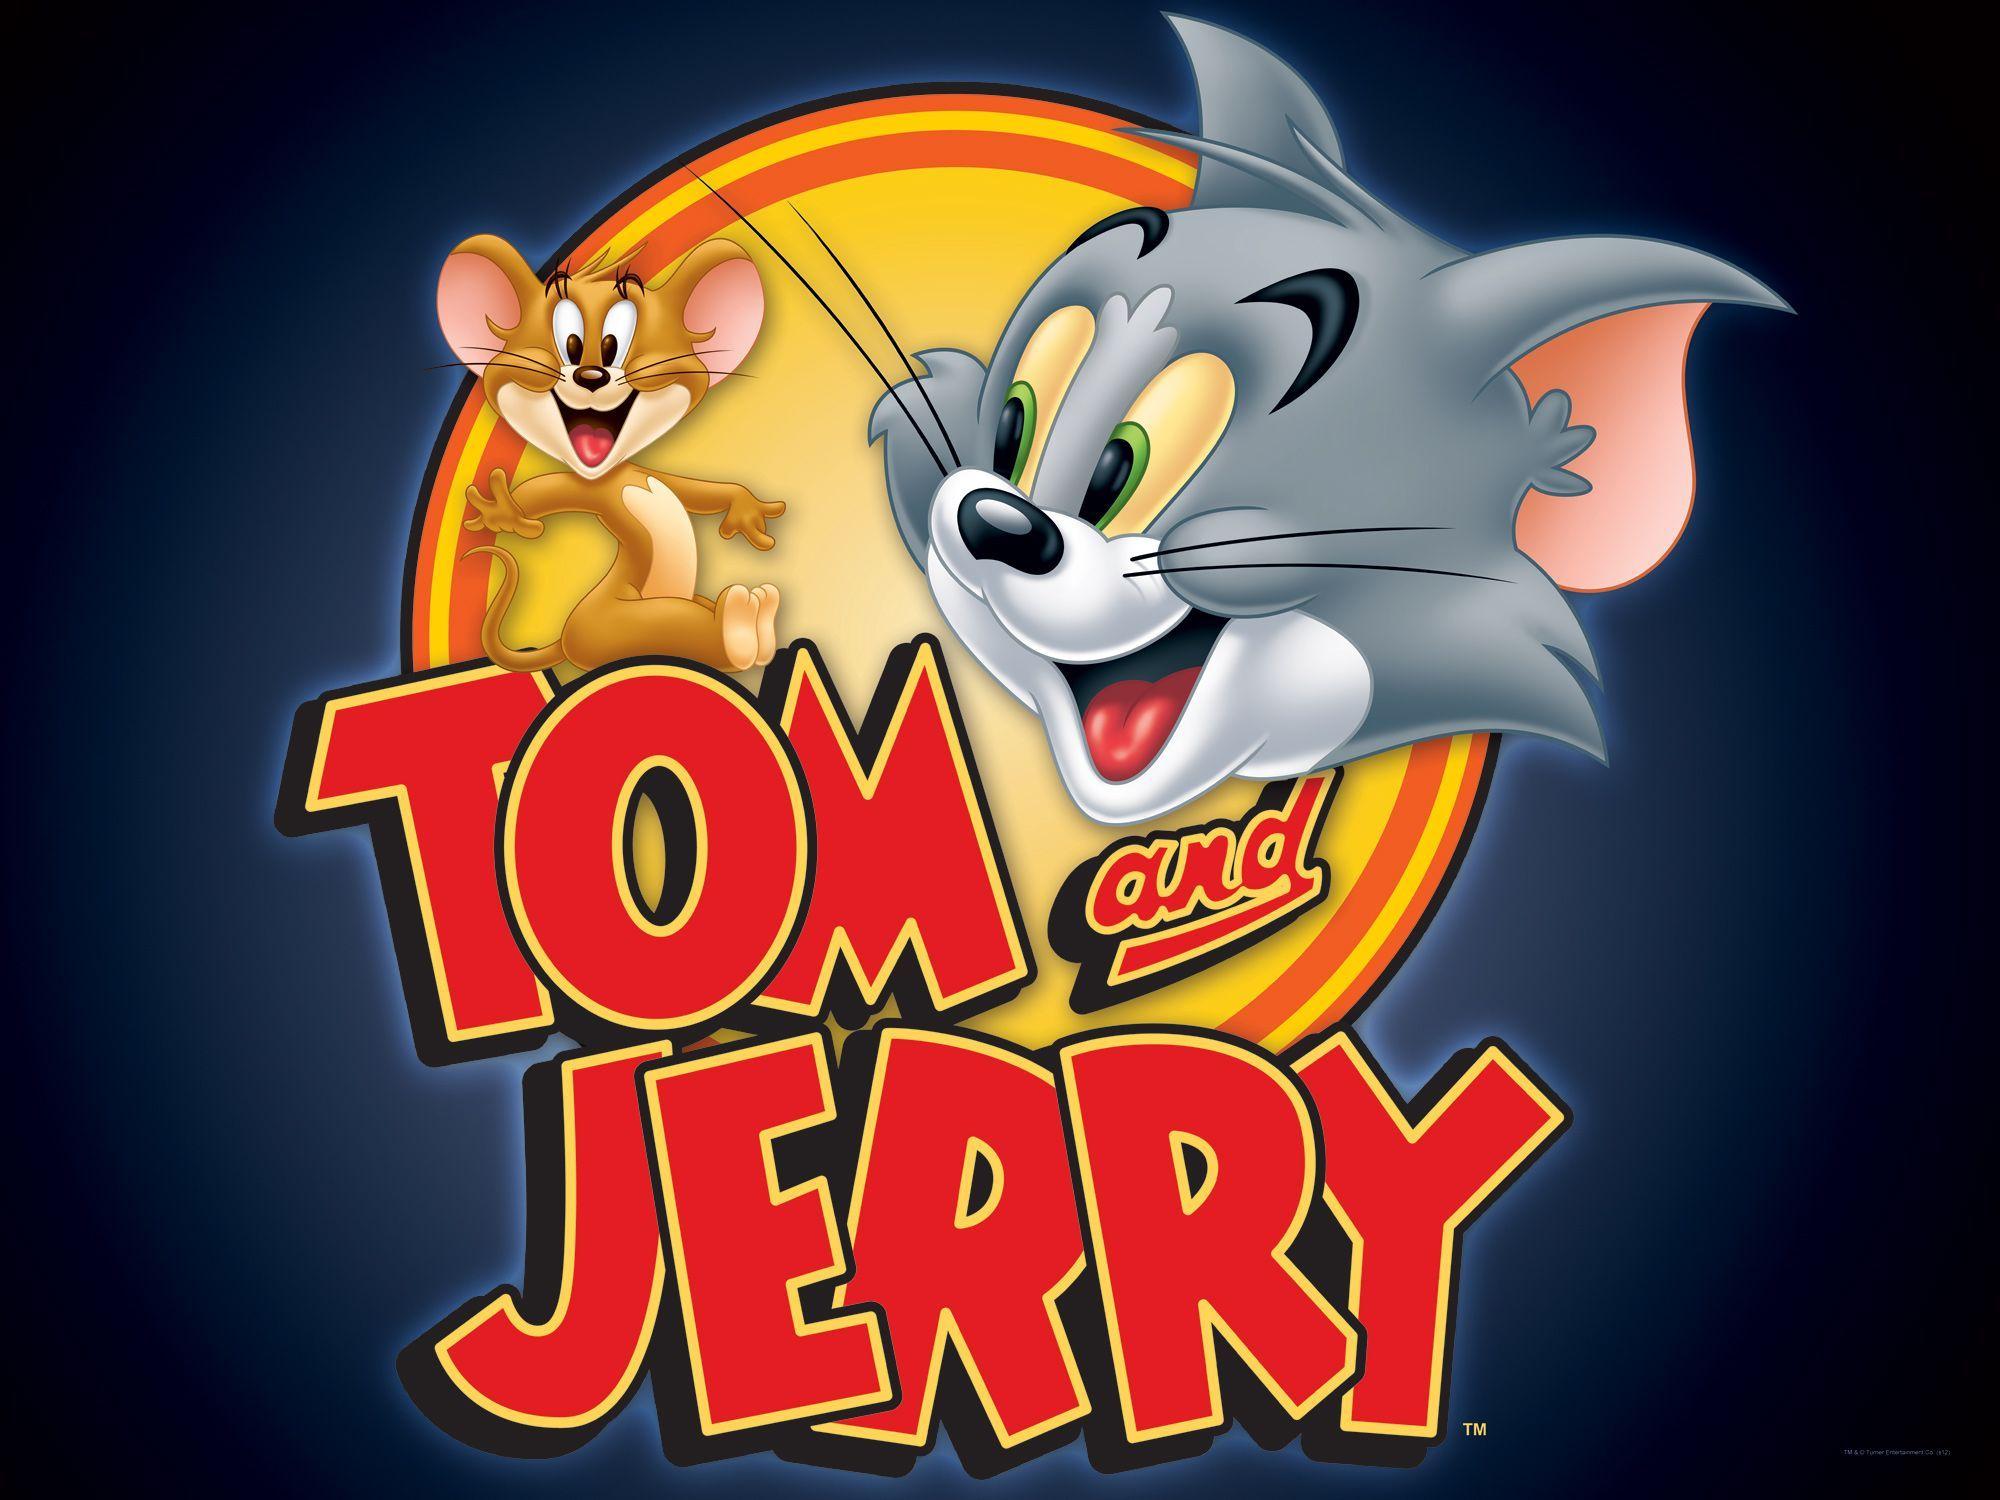 Tom and Jerry Logo - tom and jerry logo hd wallpapers | my interests | Pinterest | Tom ...